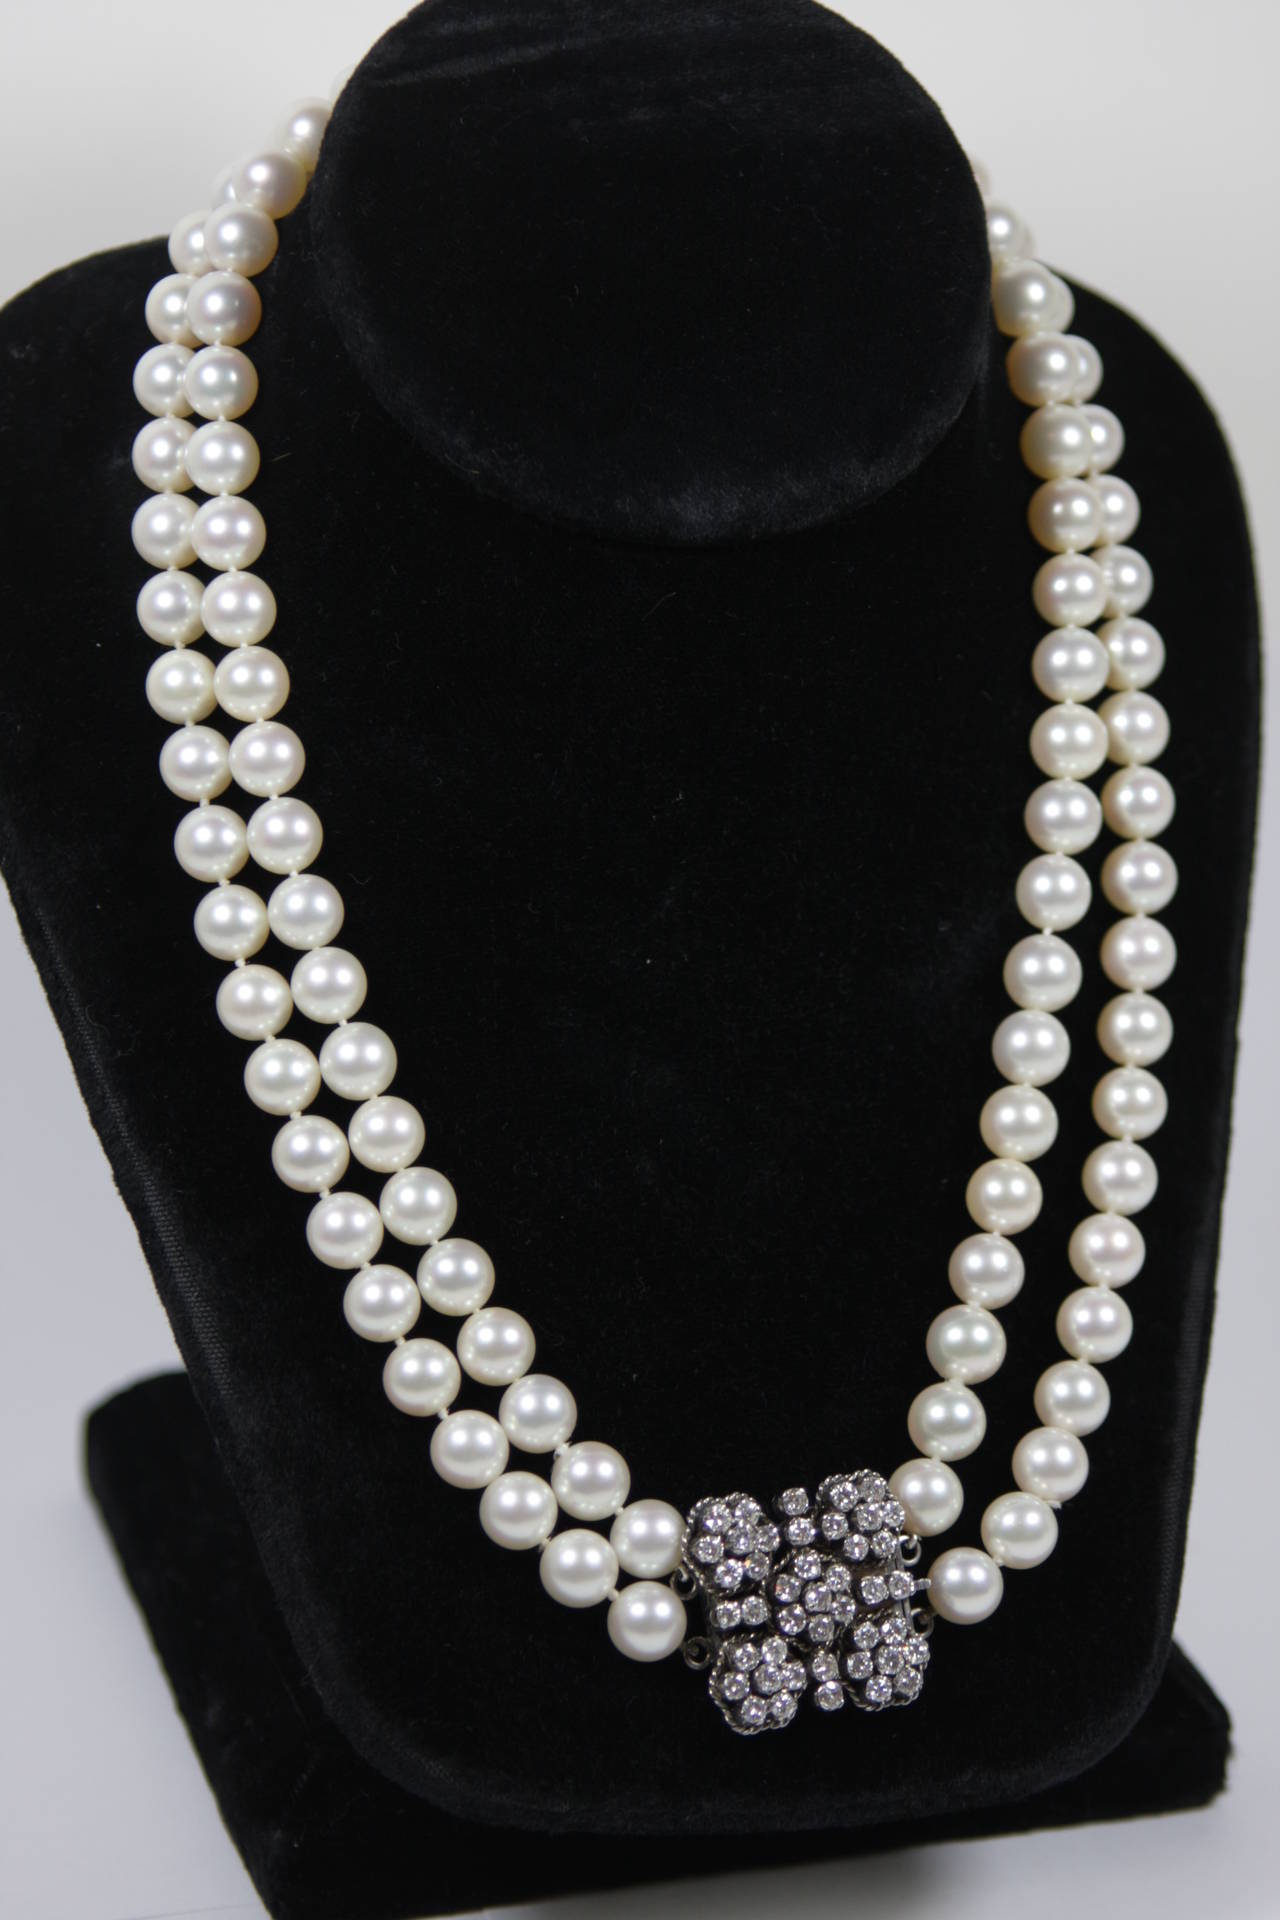 Women's Akoya Cultured Pearl Long Double Strand Necklace with Diamond Clasp